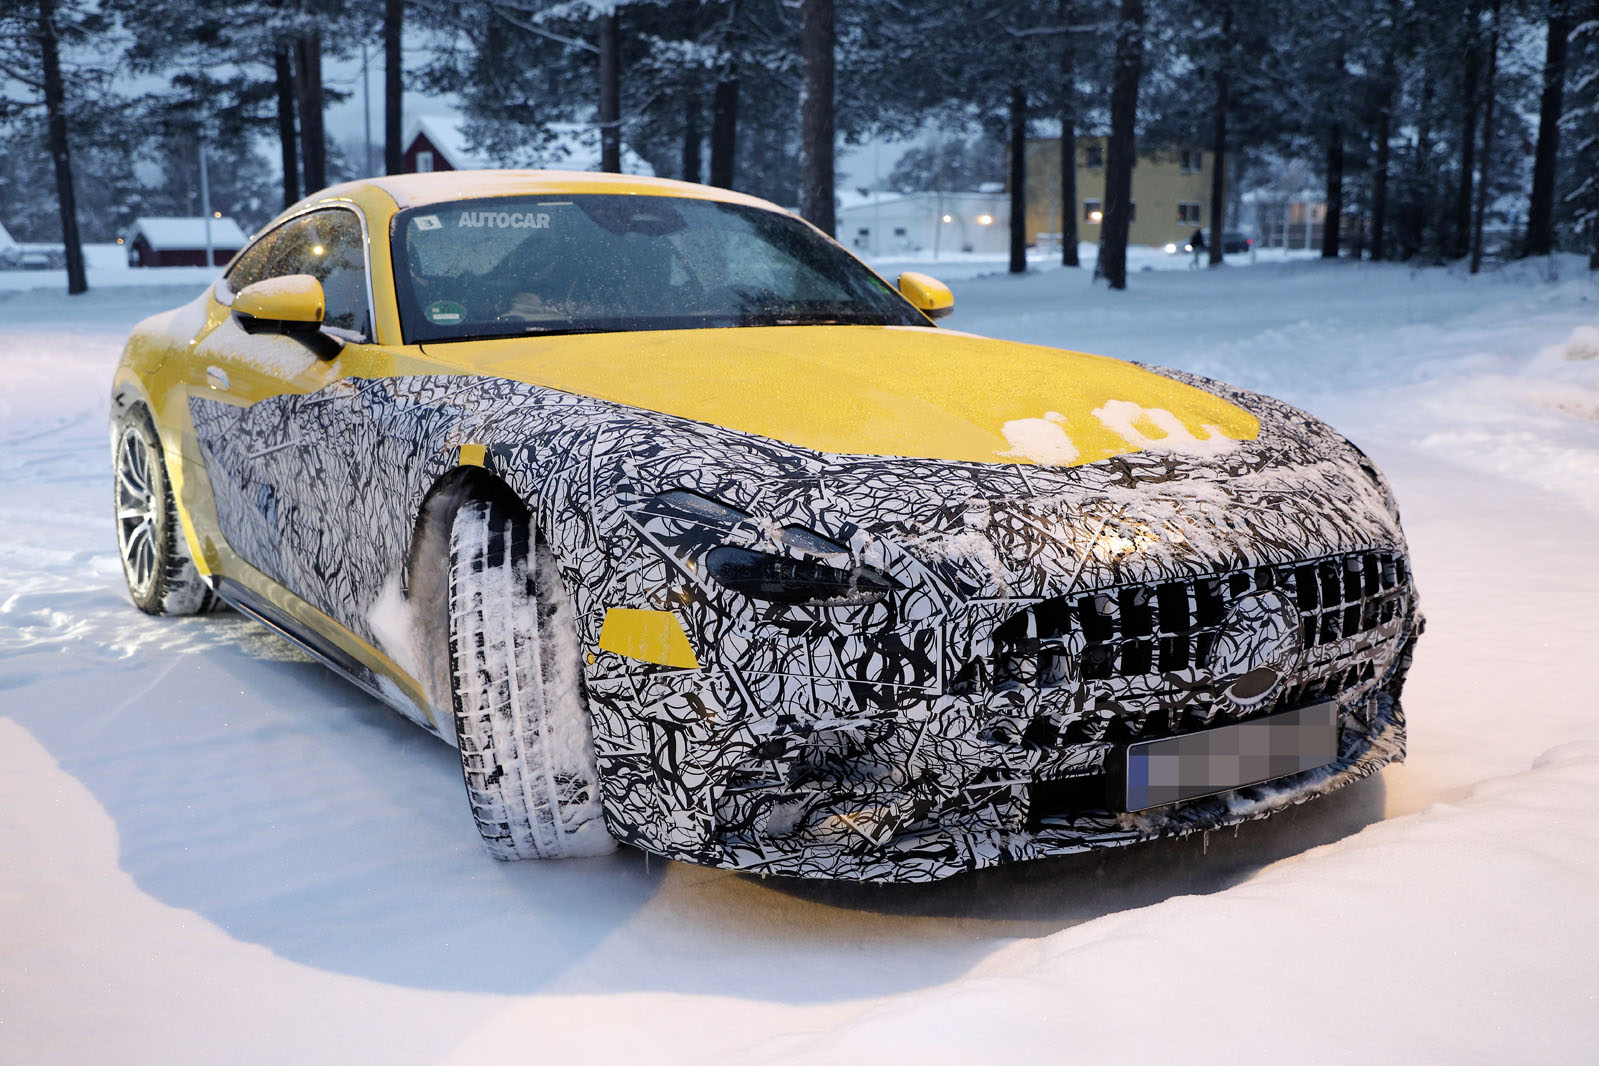 2023 Mercedes-AMG GT to be topped via 831bhp plug-in hybrid